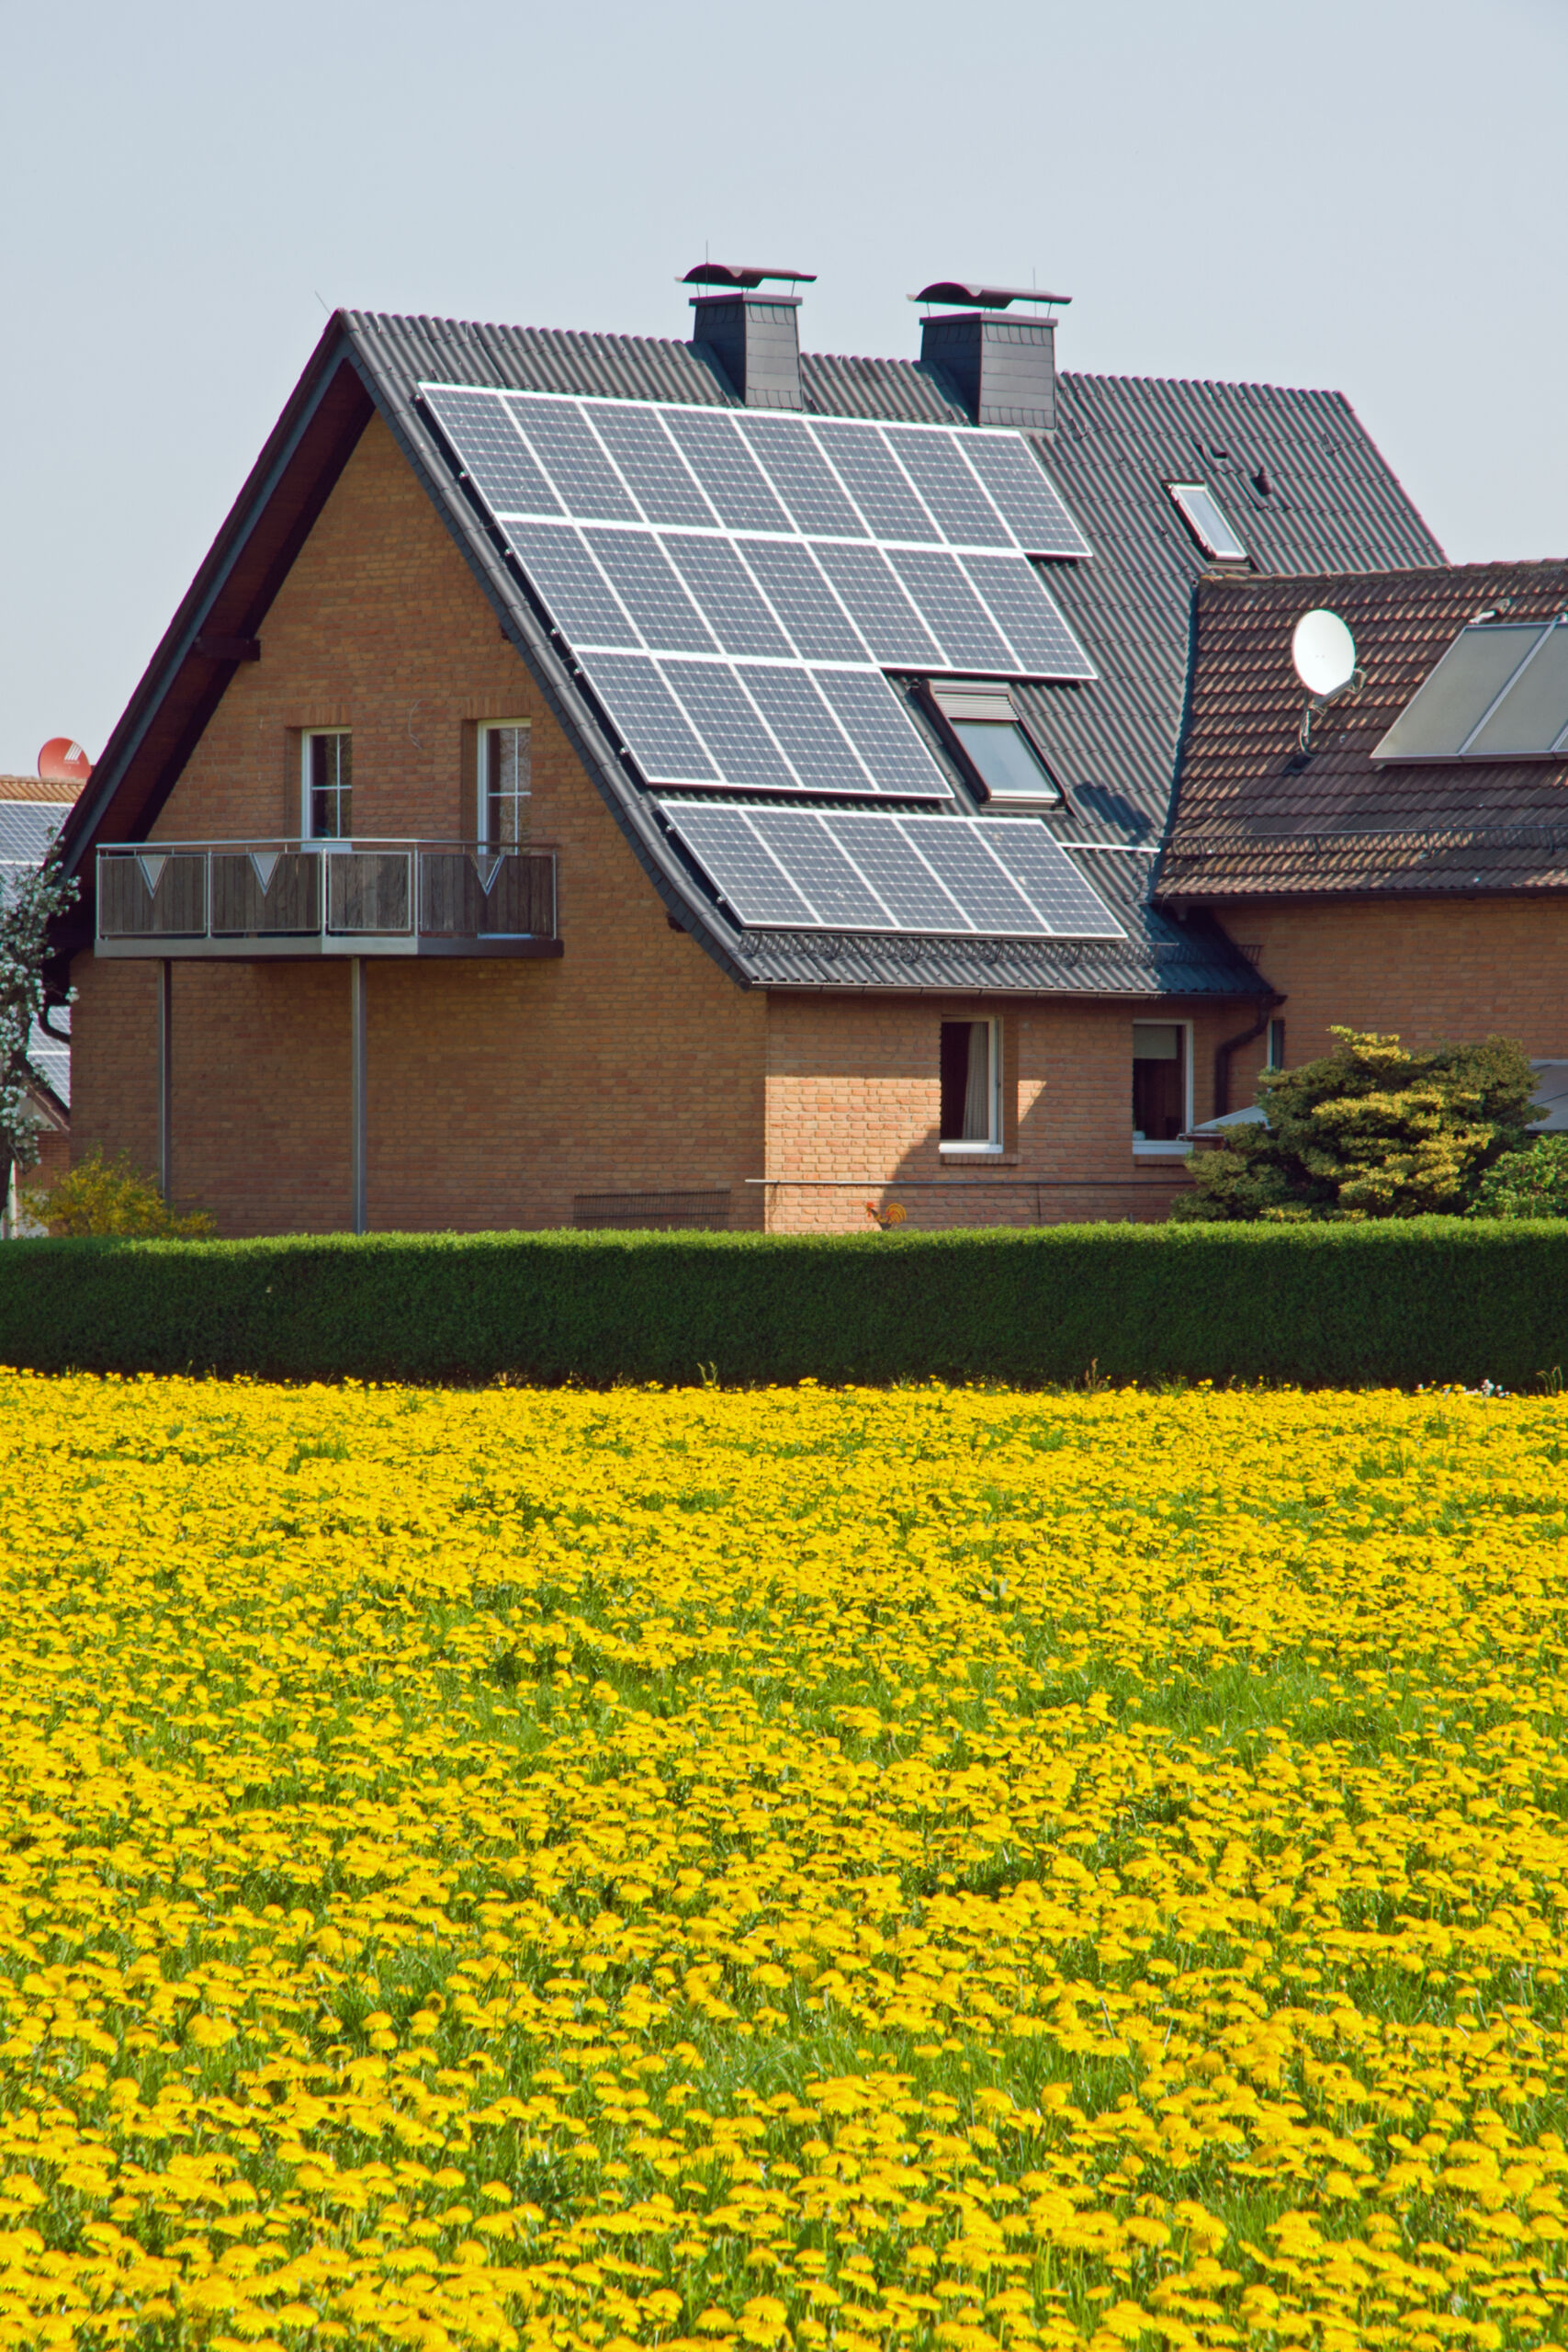 An image of a home with solar panels on the roof. Is solar a scam?